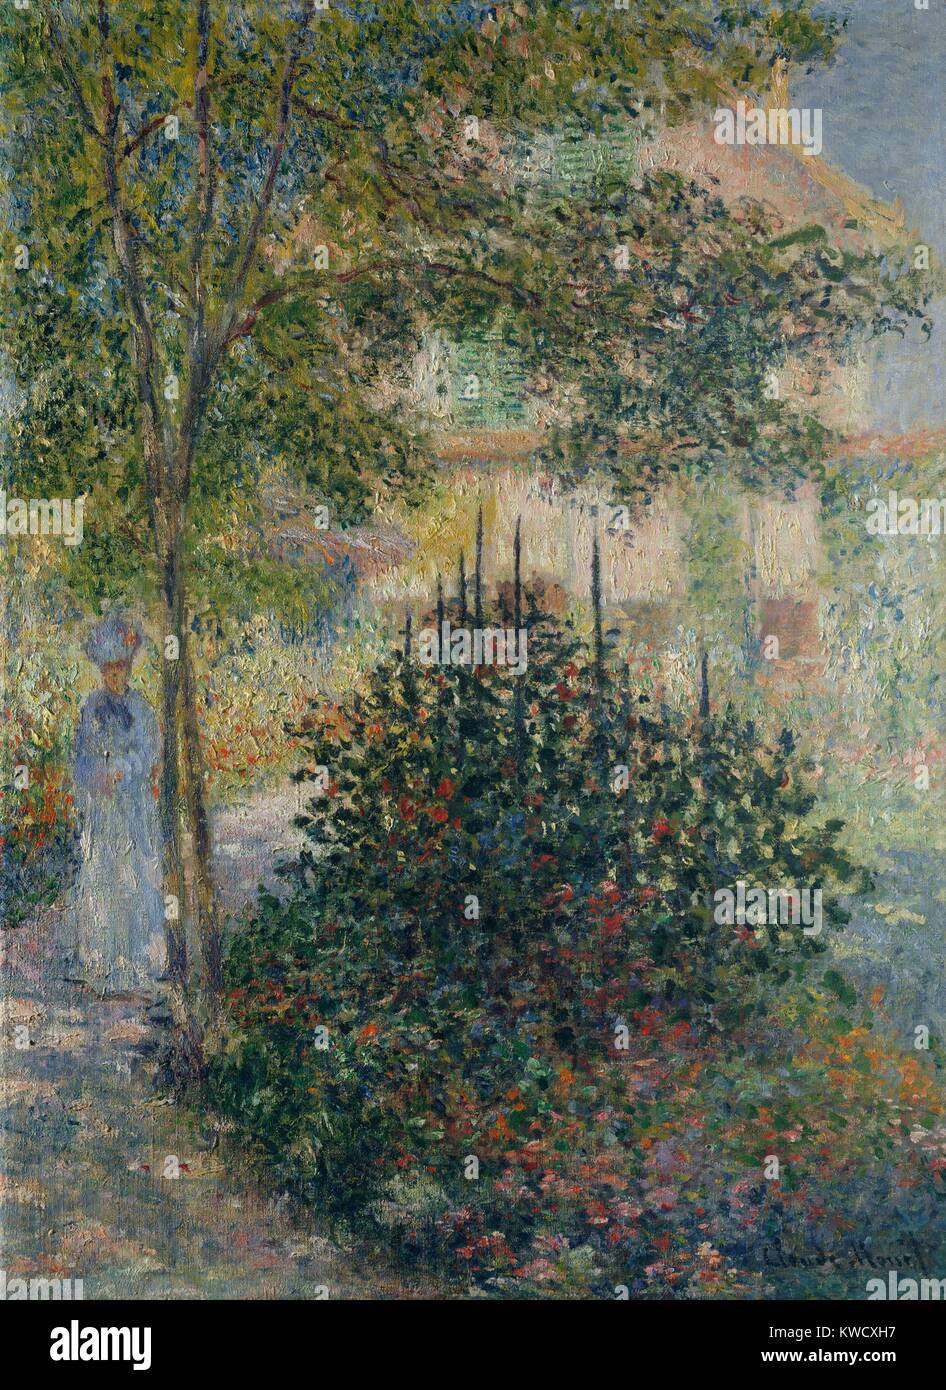 Camille Monet in the Garden at Argenteuil, by Claude Monet, French impressionist oil painting. Monet applied the paint in small daubs over the entire canvas, a style that became characteristic of his mature works (BSLOC_2017_3_25) Stock Photo